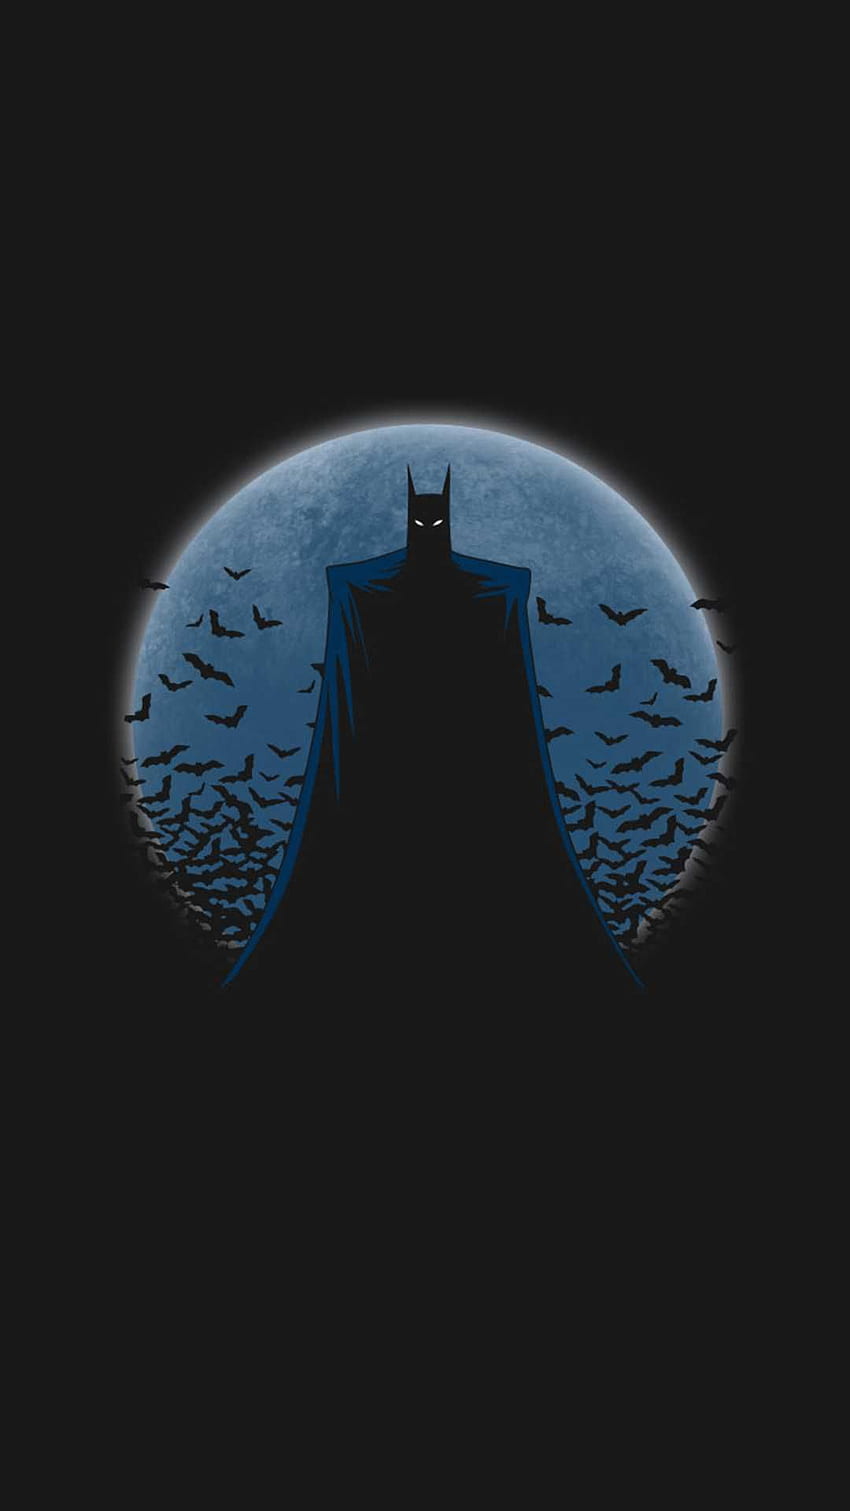 IPhone wallpaper with batman in front of the moon - Batman